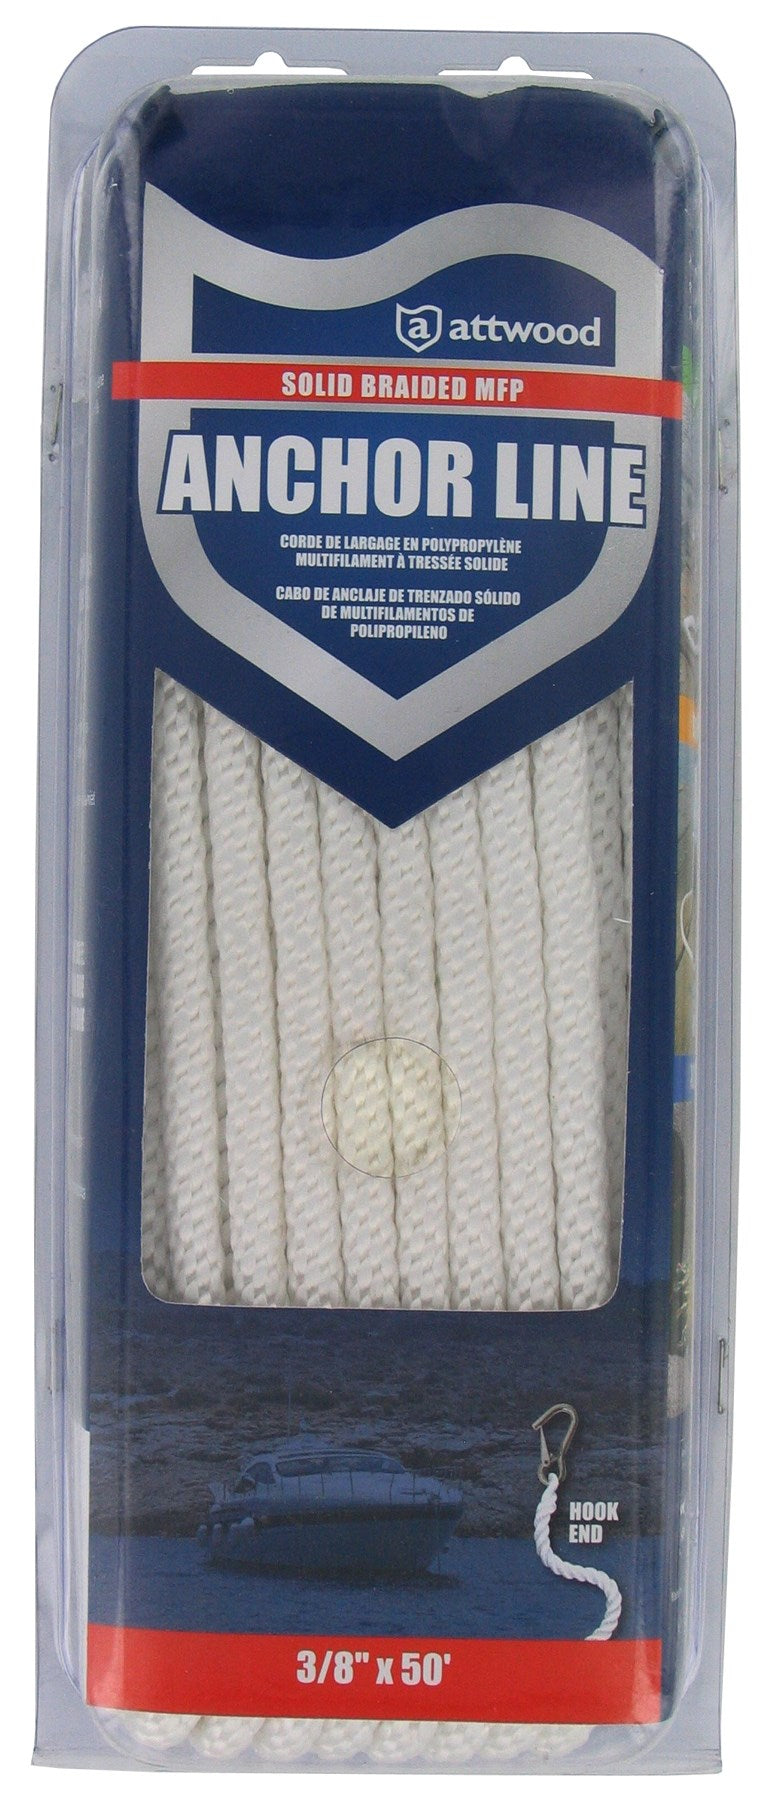 Attwood, Attwood 11723-7 3/8" X 50' Solid Braided Multi Filament Poly Anchor Line